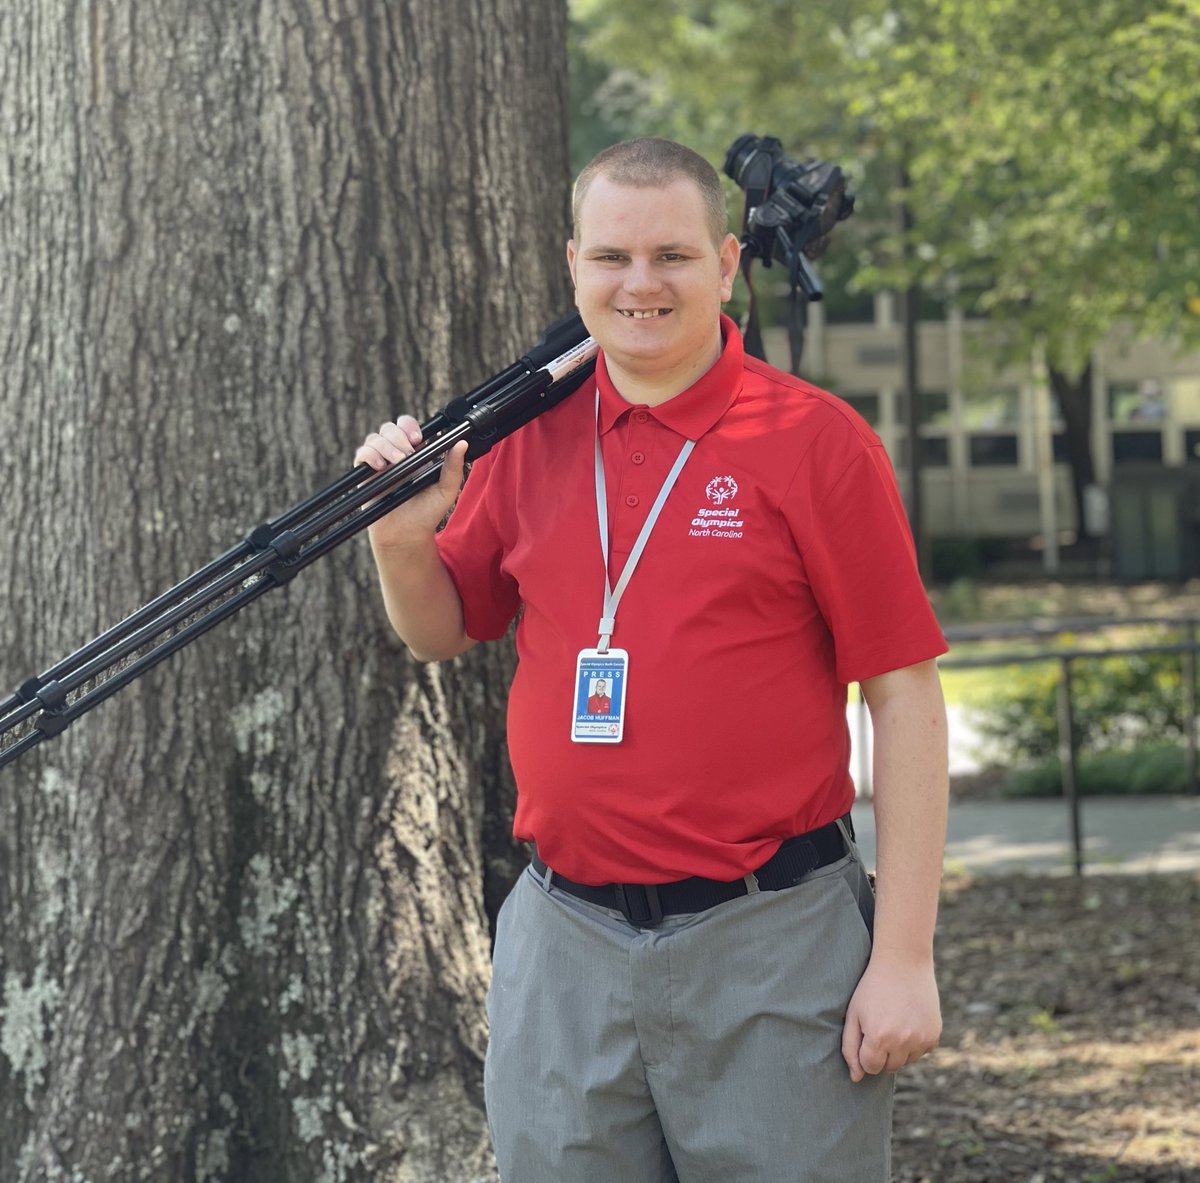 Currently at the 2024 @SONorthCarolina Summer Games doing photography and cinematography. 

#SONCSG #Photography #Cinematography #SpecialOlympics #ChooseToInclude #InclusionRevolution